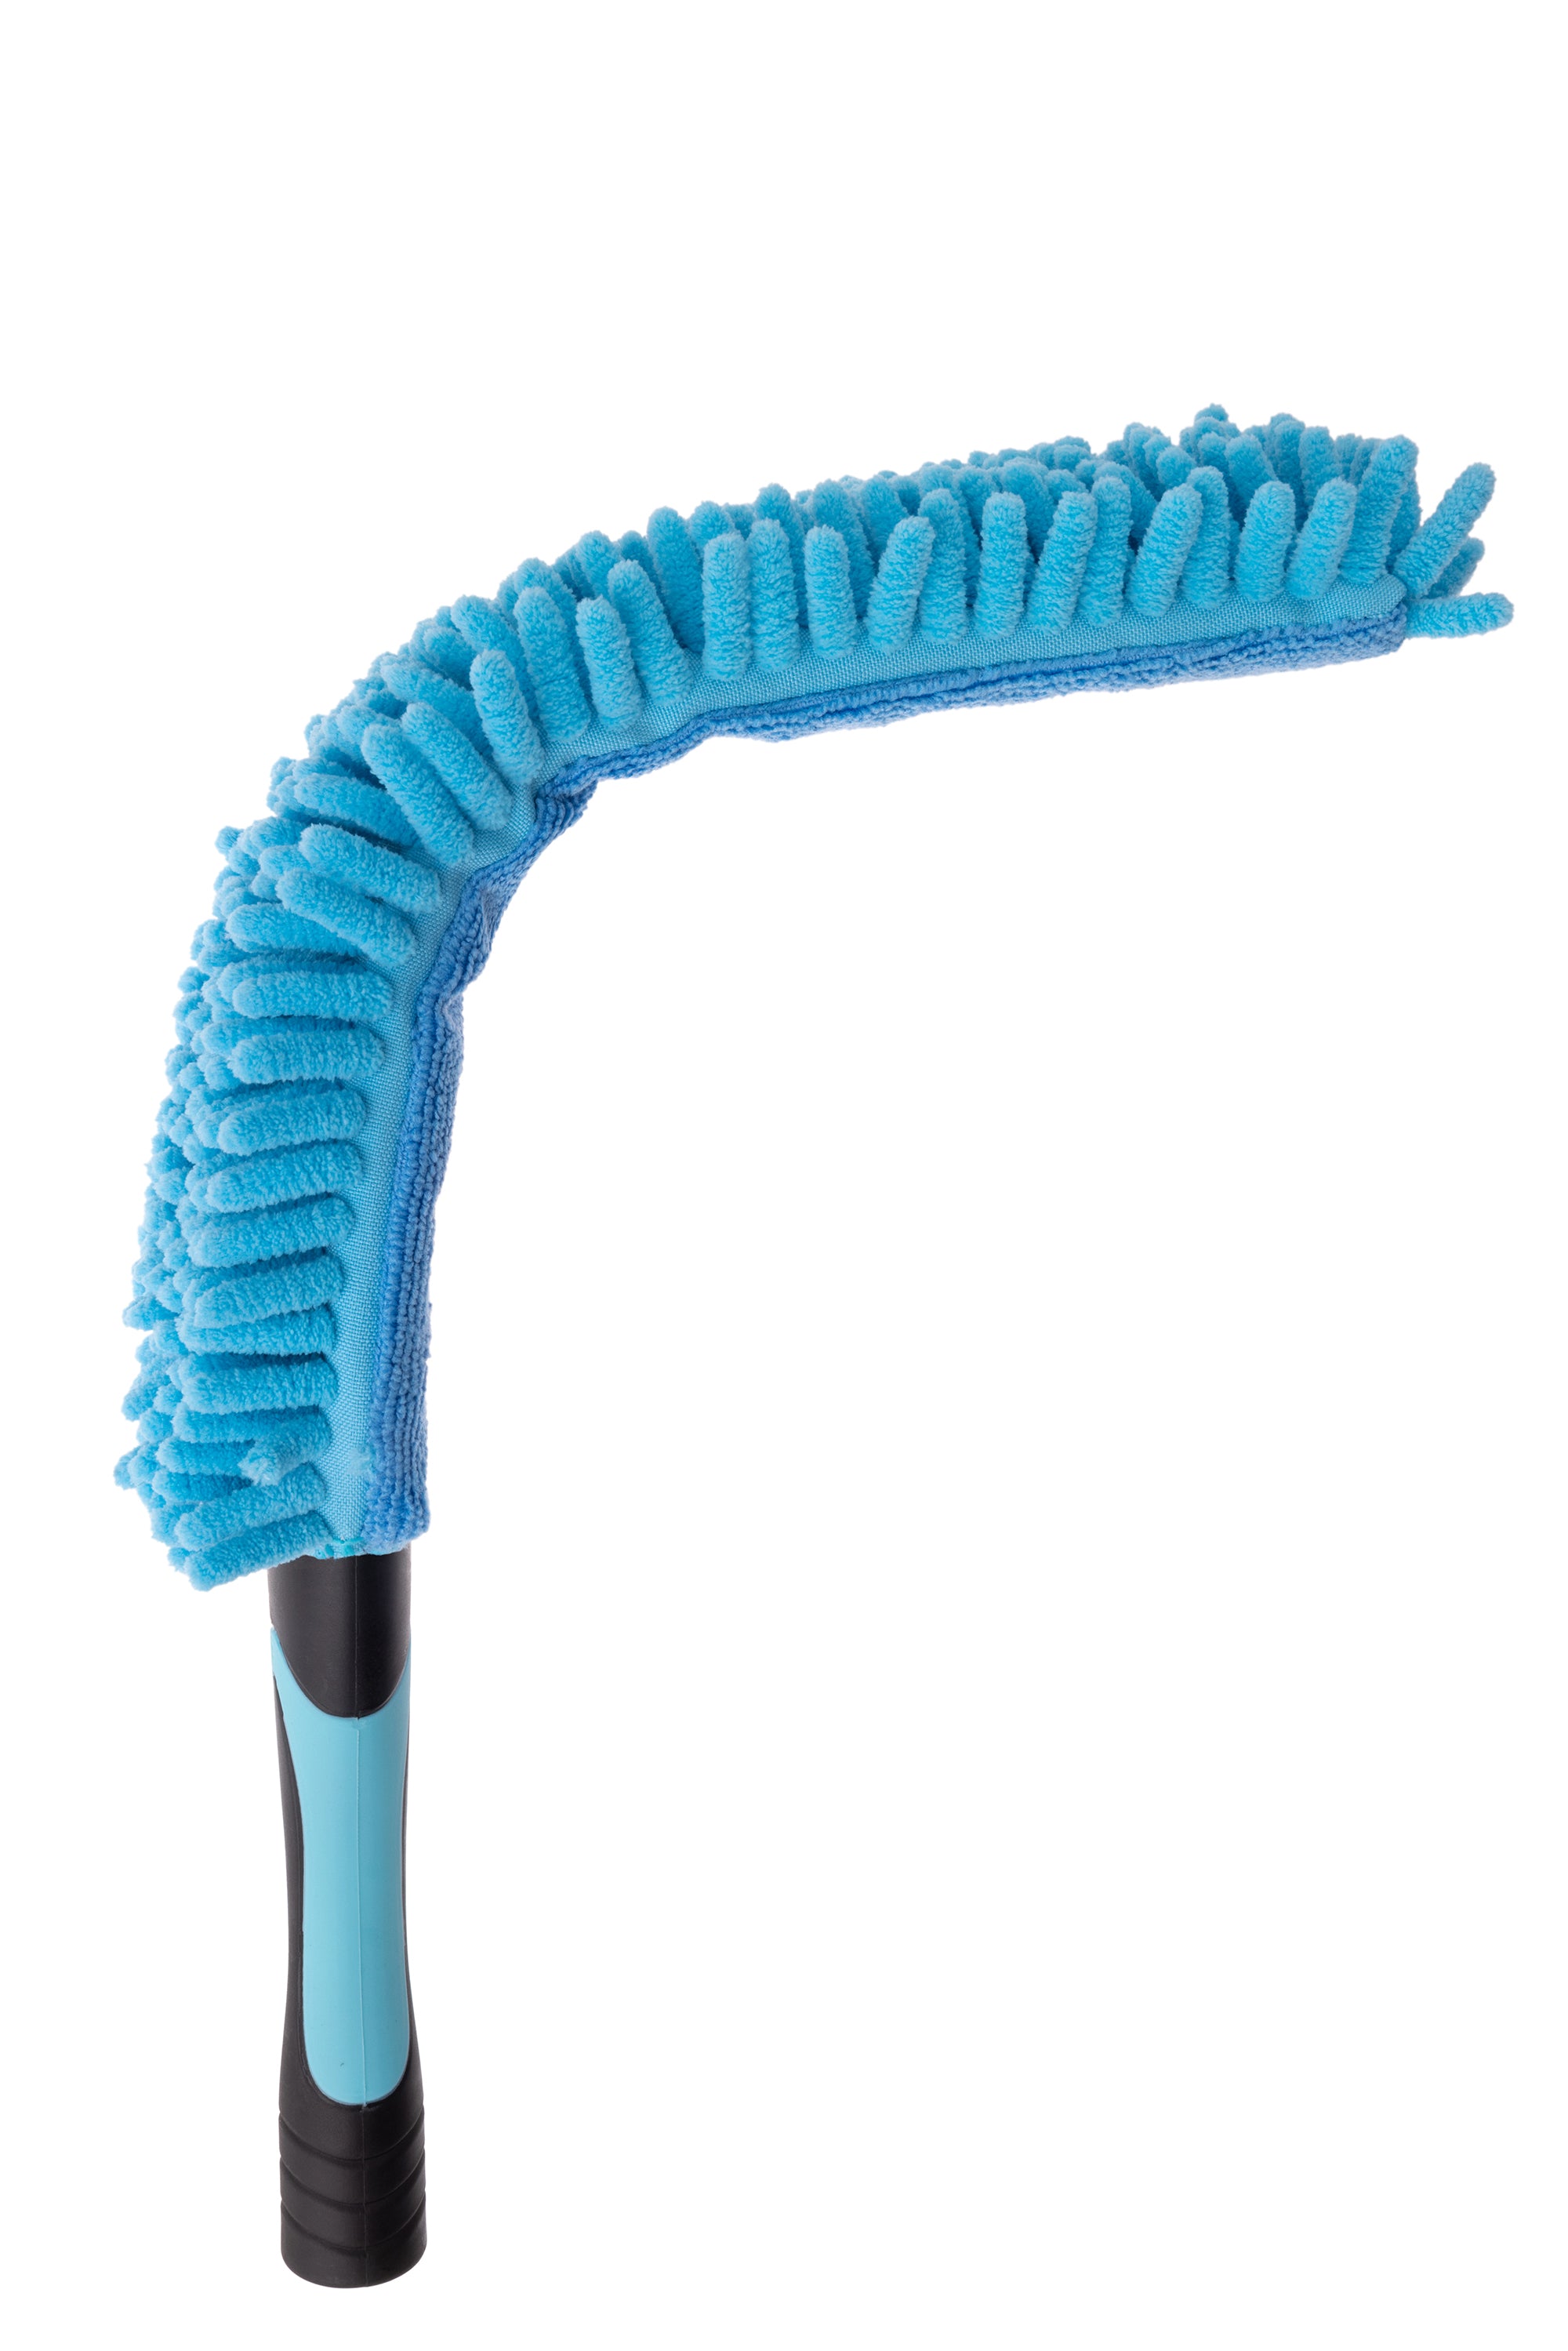 Flexible Fan Dusting Brush (Non-Disassembly Cleaning), 48CM Large